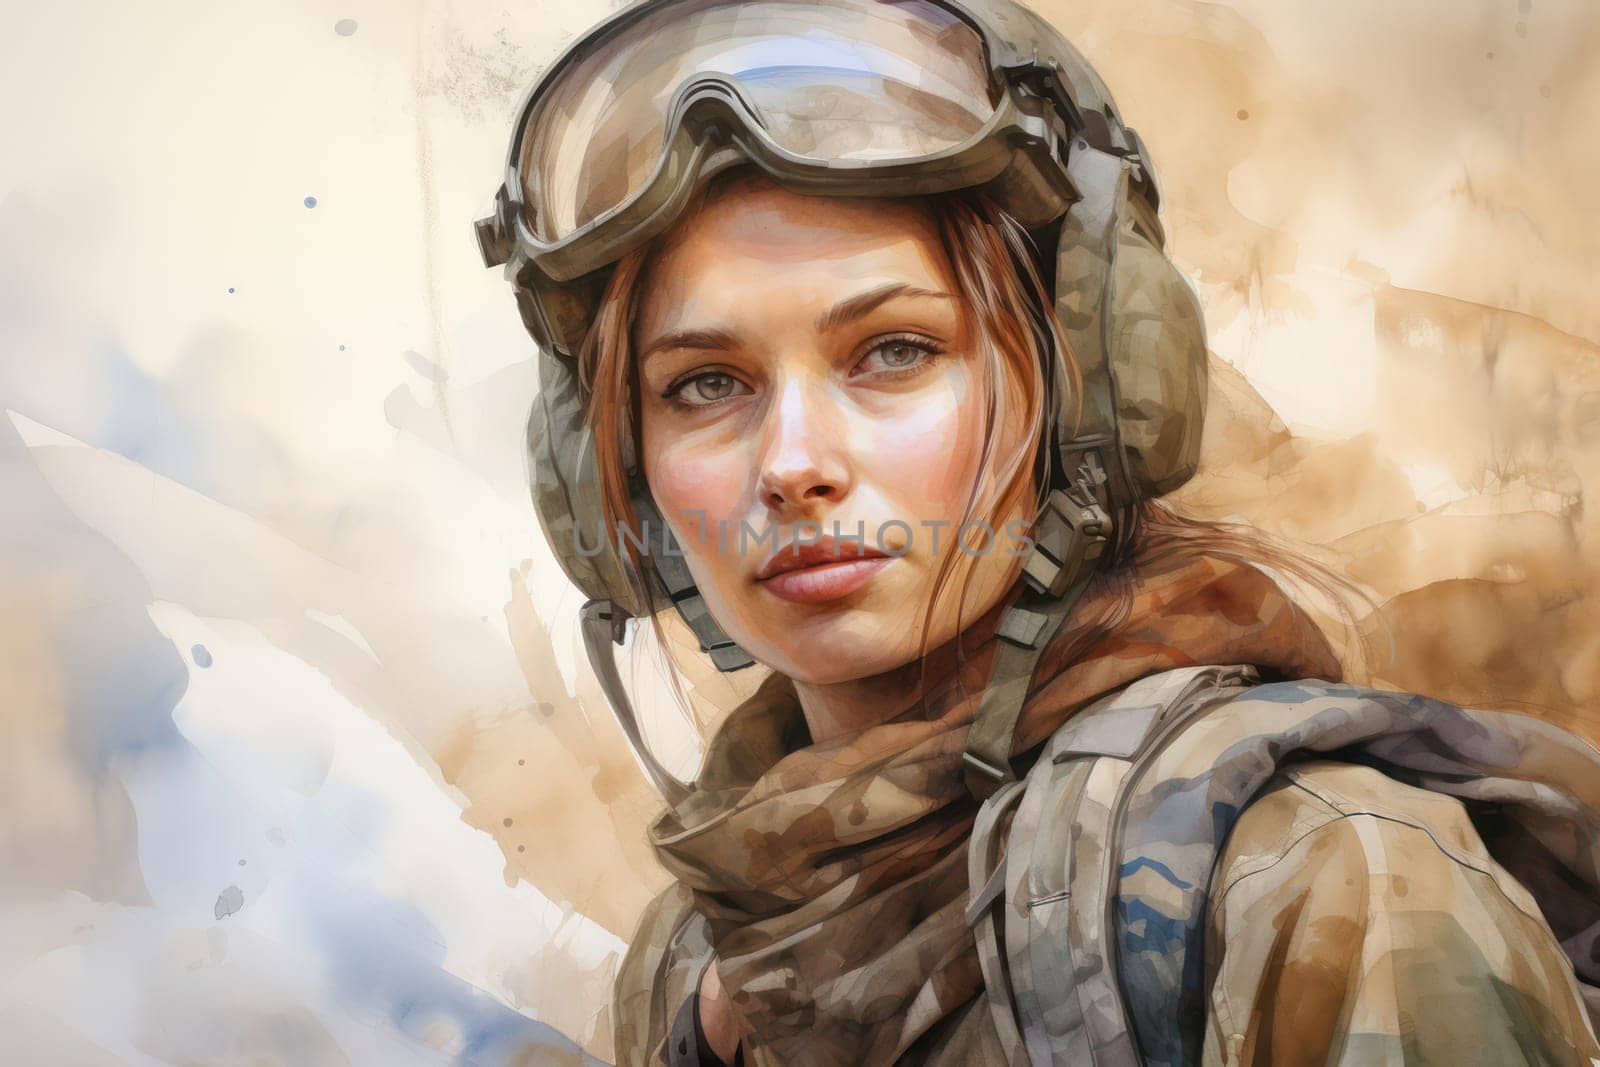 Warrior Woman: A Powerful Portrait of a Young Female Soldier in a Military Uniform, Armed with a Rifle for Defense by Vichizh